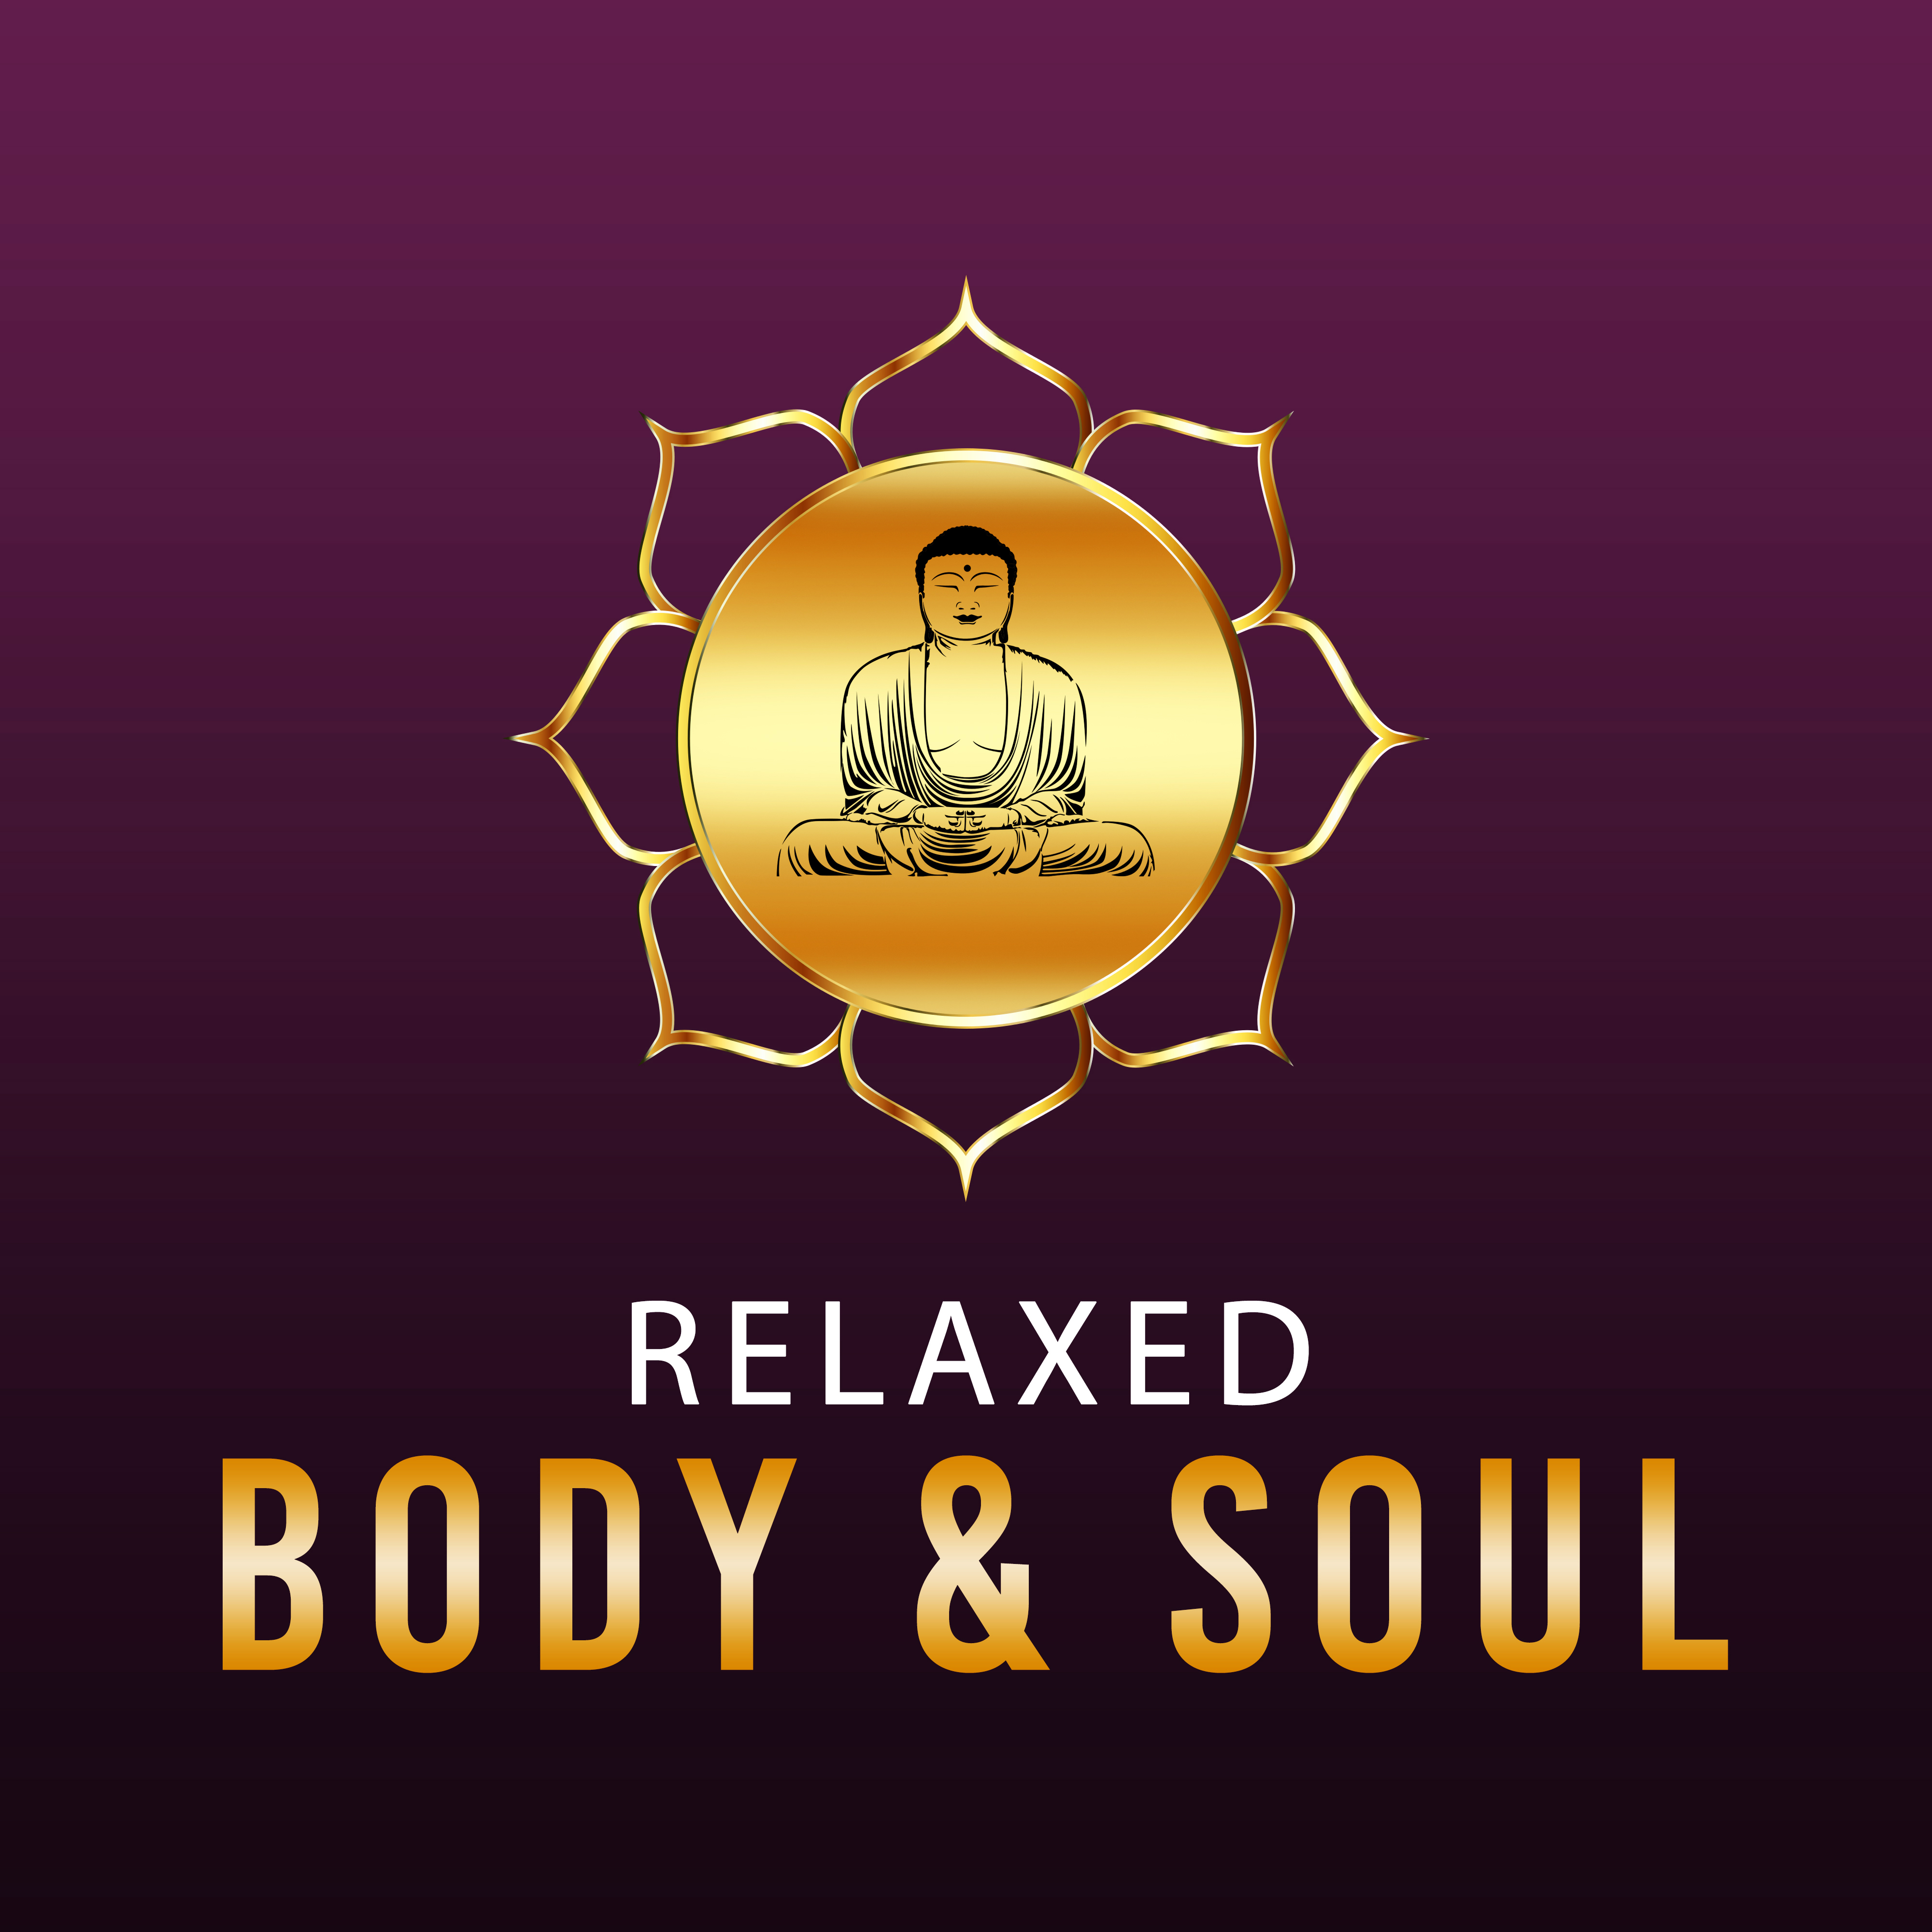 Relaxed Body  Soul  Finest Selected Nature Songs, Relaxing Music, Calmness, Rest, Yoga Music